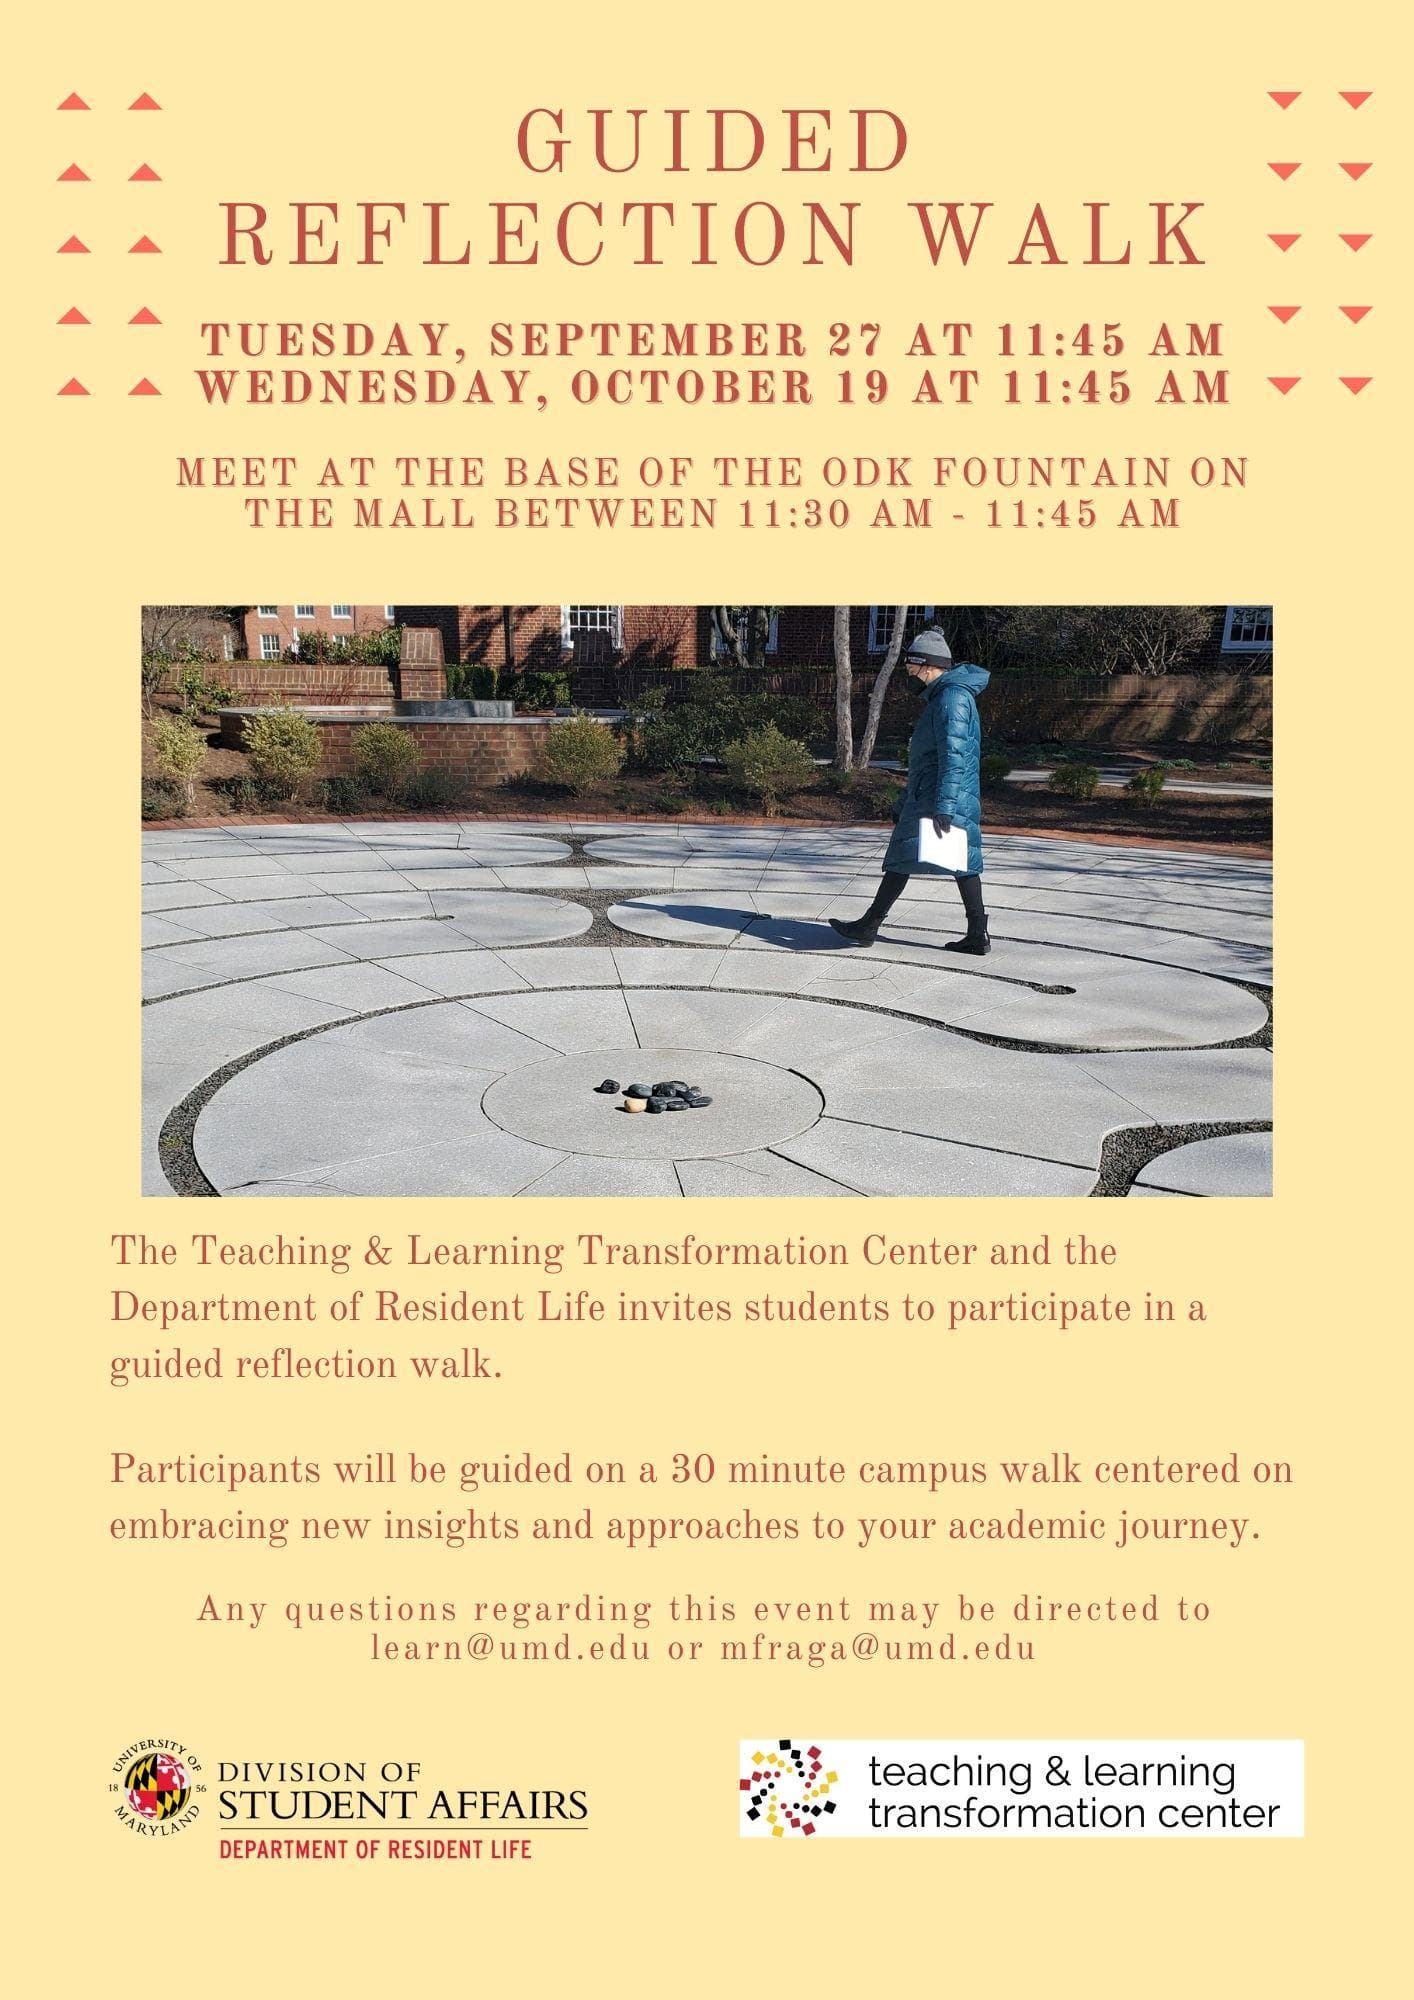 Image of person walking the labyrinth